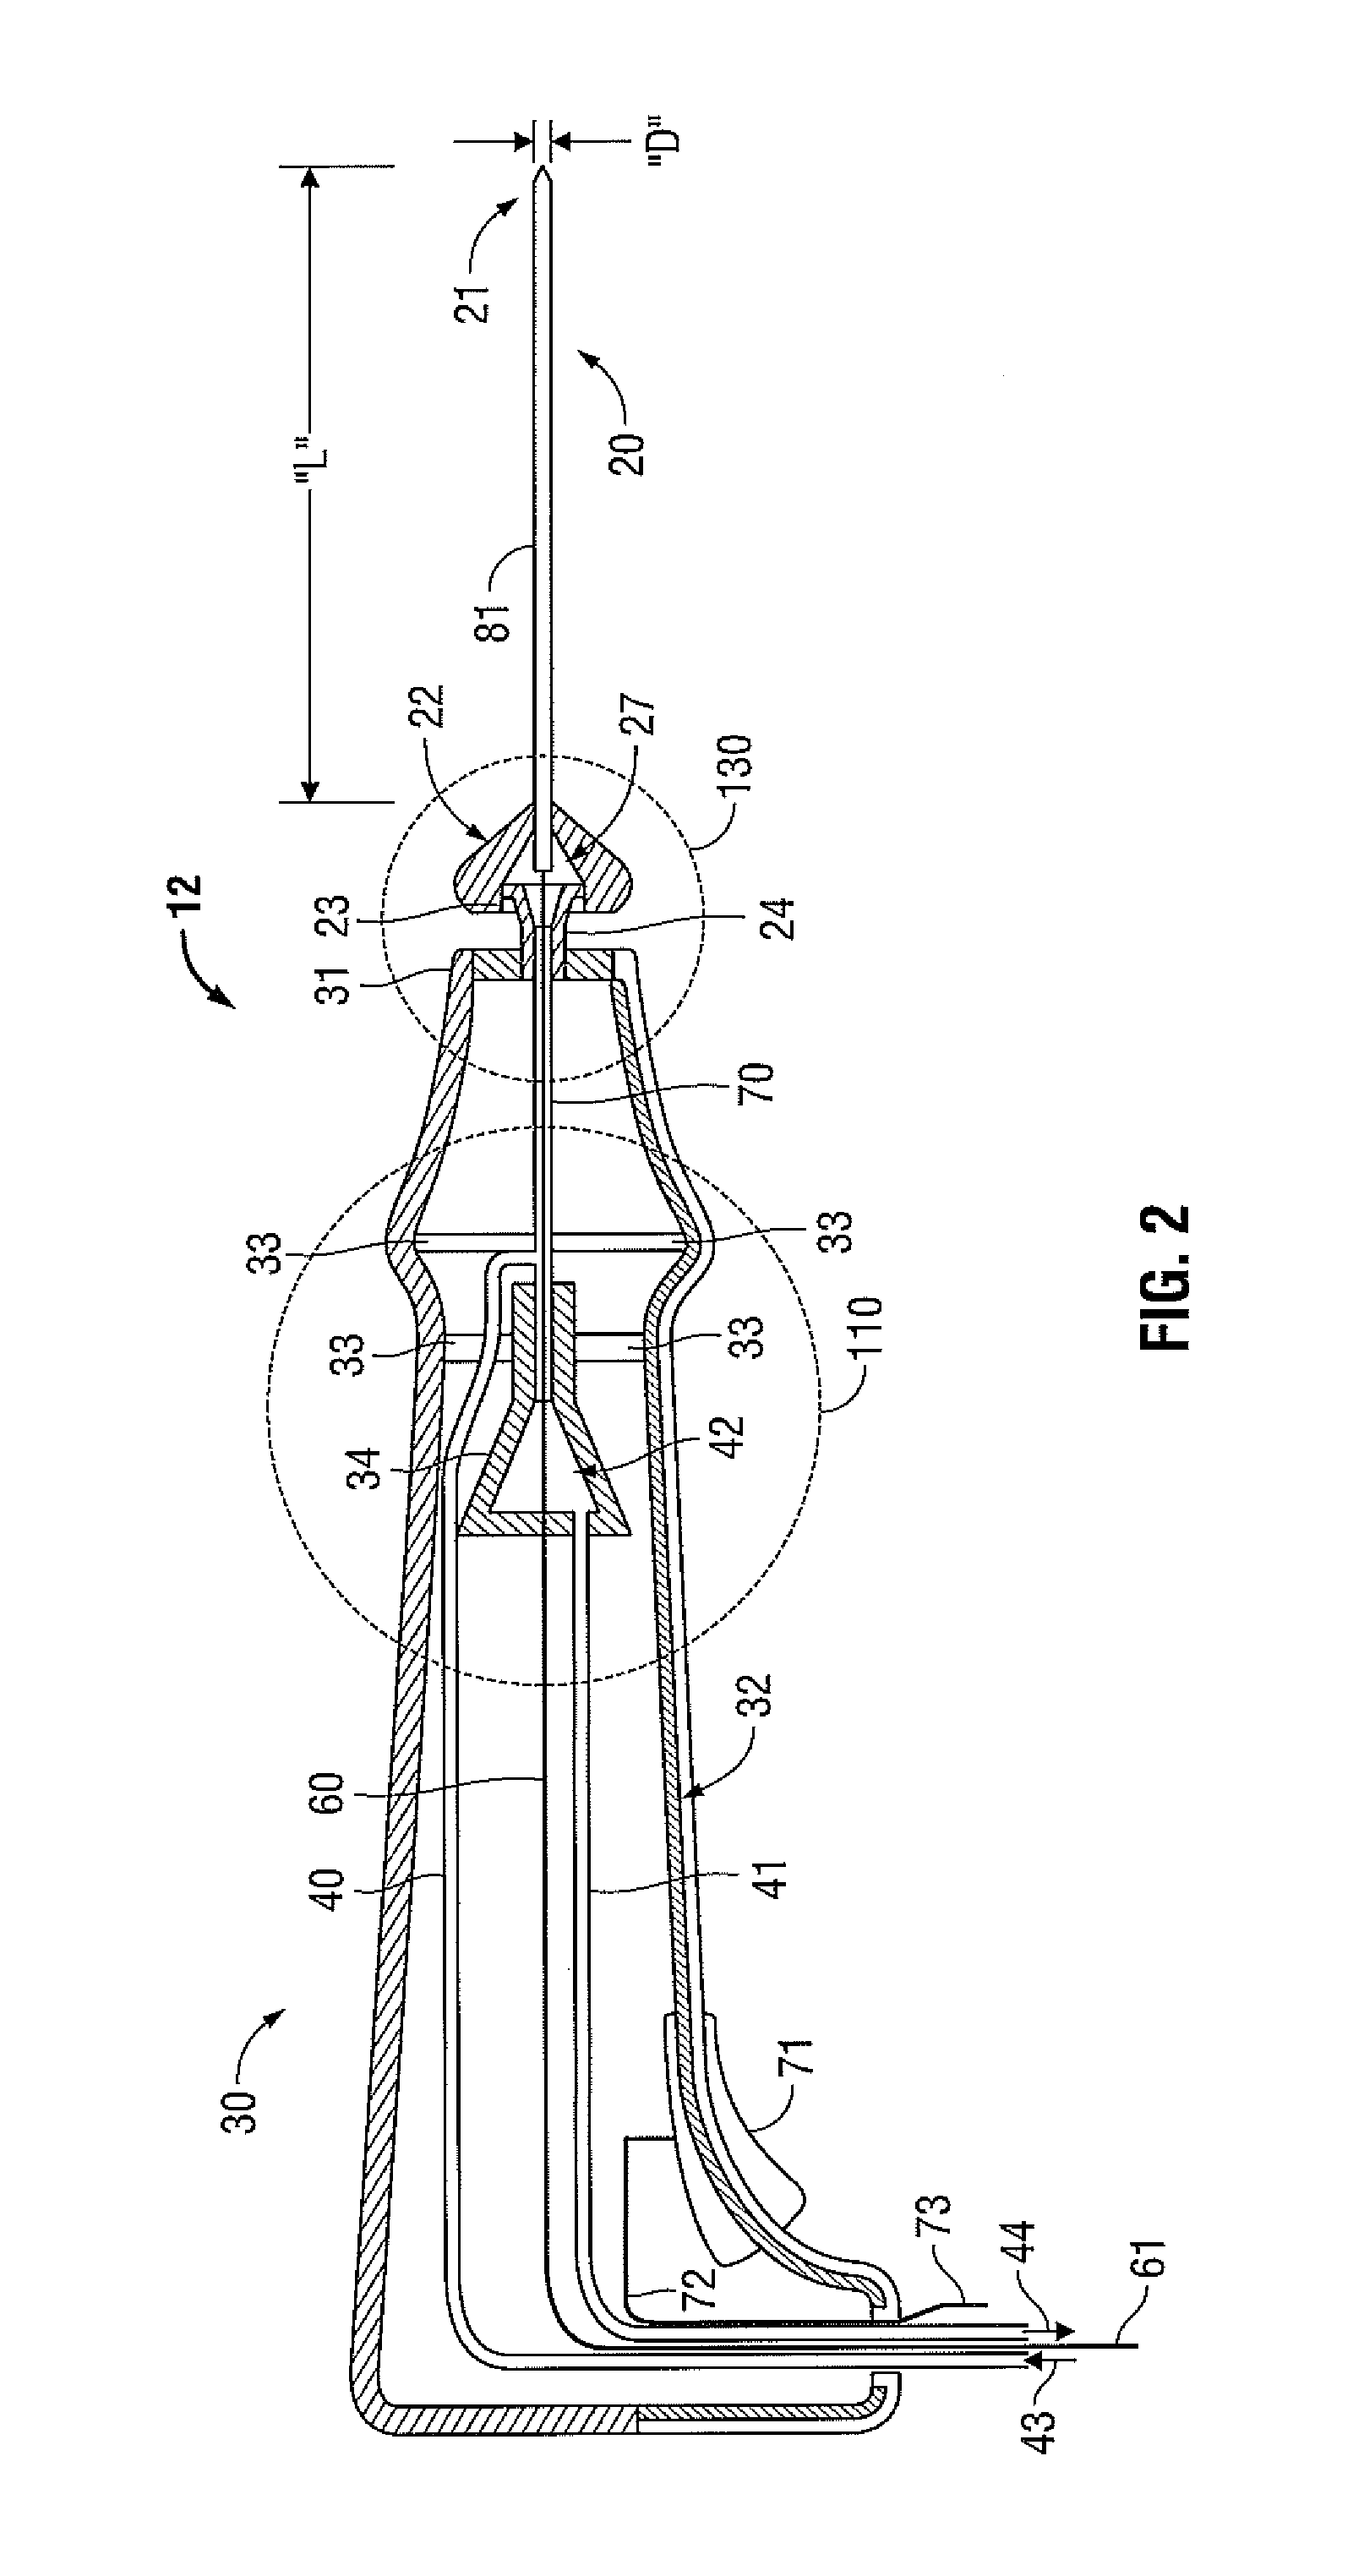 Microwave Ablation Instrument with Interchangeable Antenna Probe